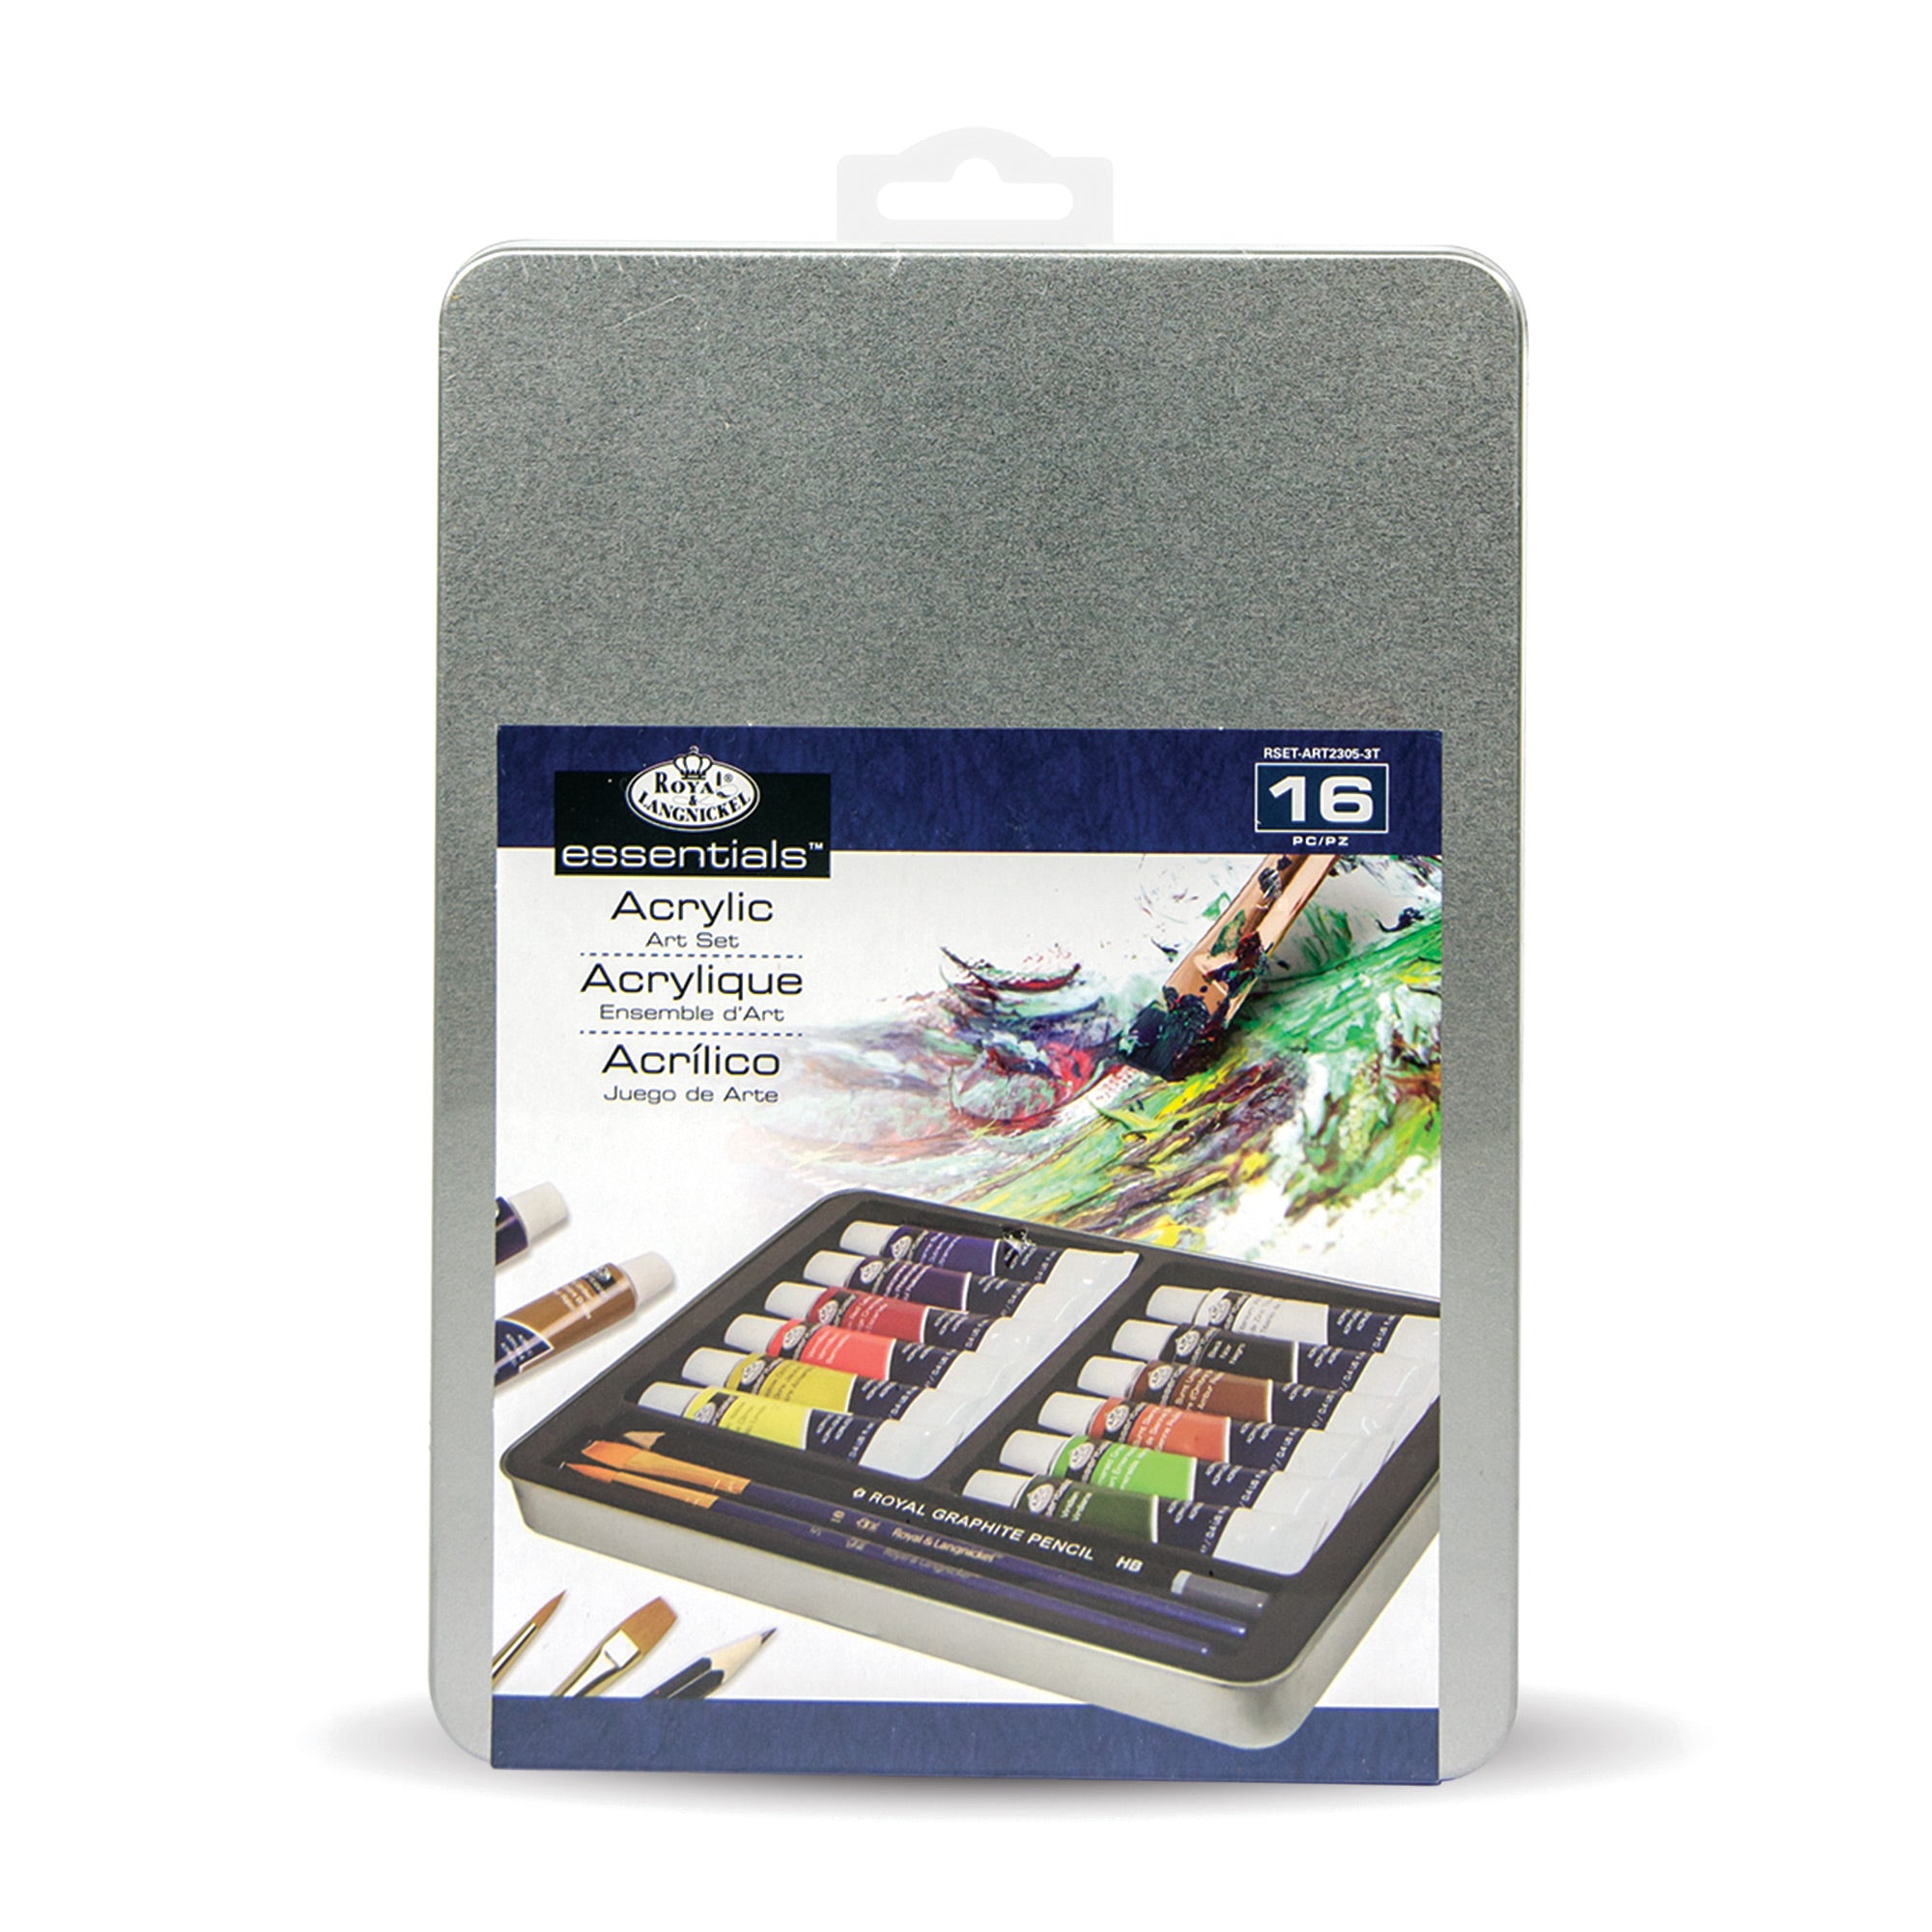 Royal & Langnickel Acrylic Painting Set With Medium Easel 20pc